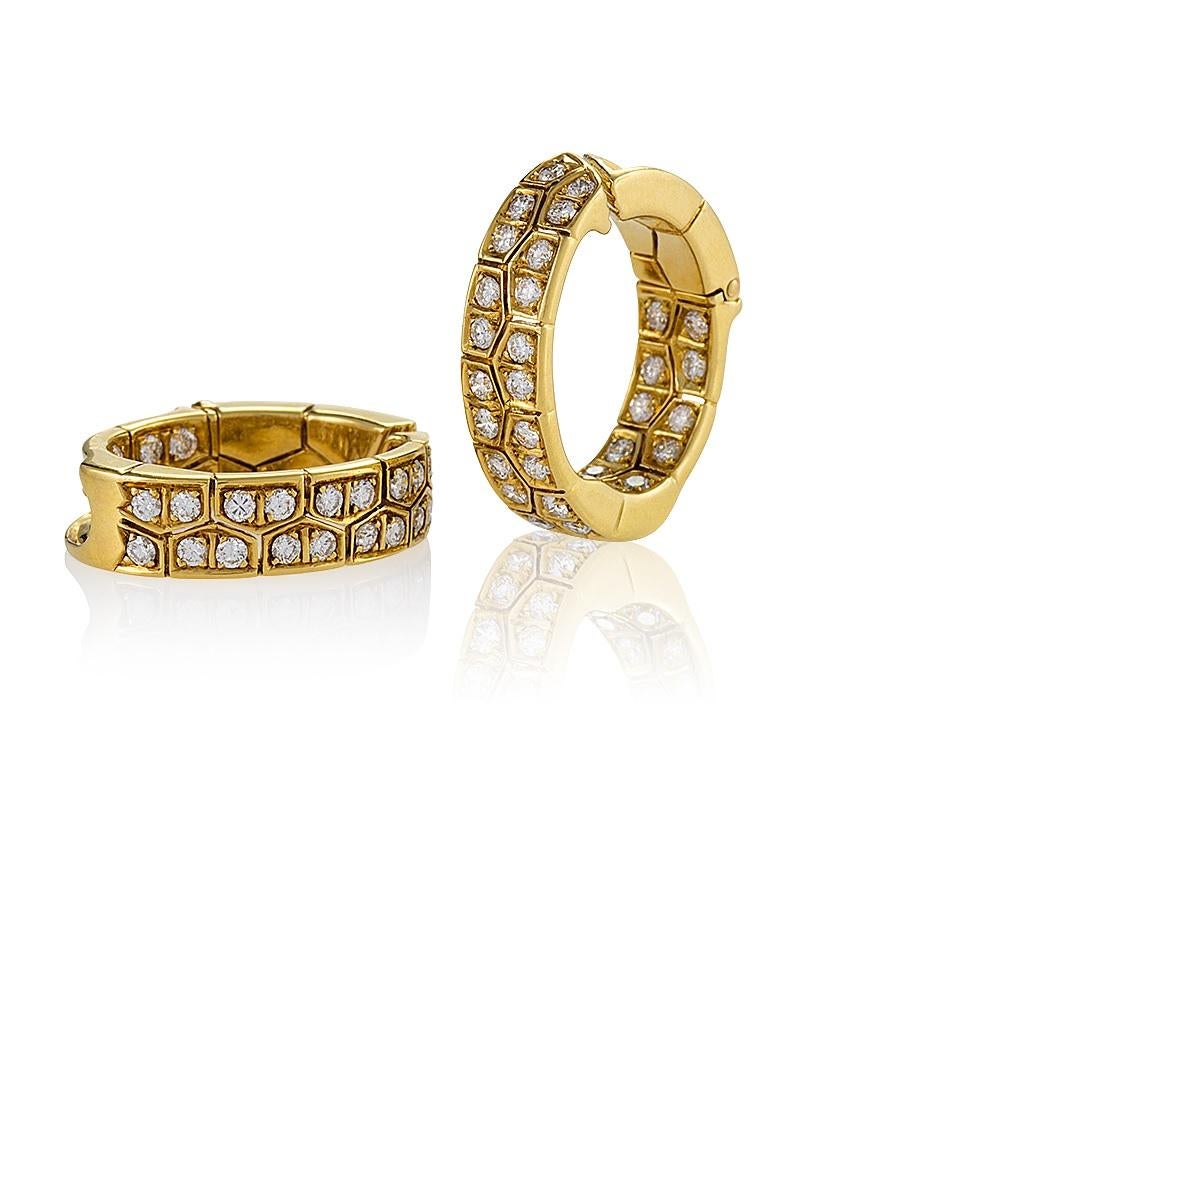 A pair of French Late-20th Century 18 karat gold earrings with diamonds by Van Cleef & Arpels. The hoop earrings have 60 round diamonds with an approximate total weight of 3.00 carats, F-G color, VS clarity.  The earrings are designed in a modernist